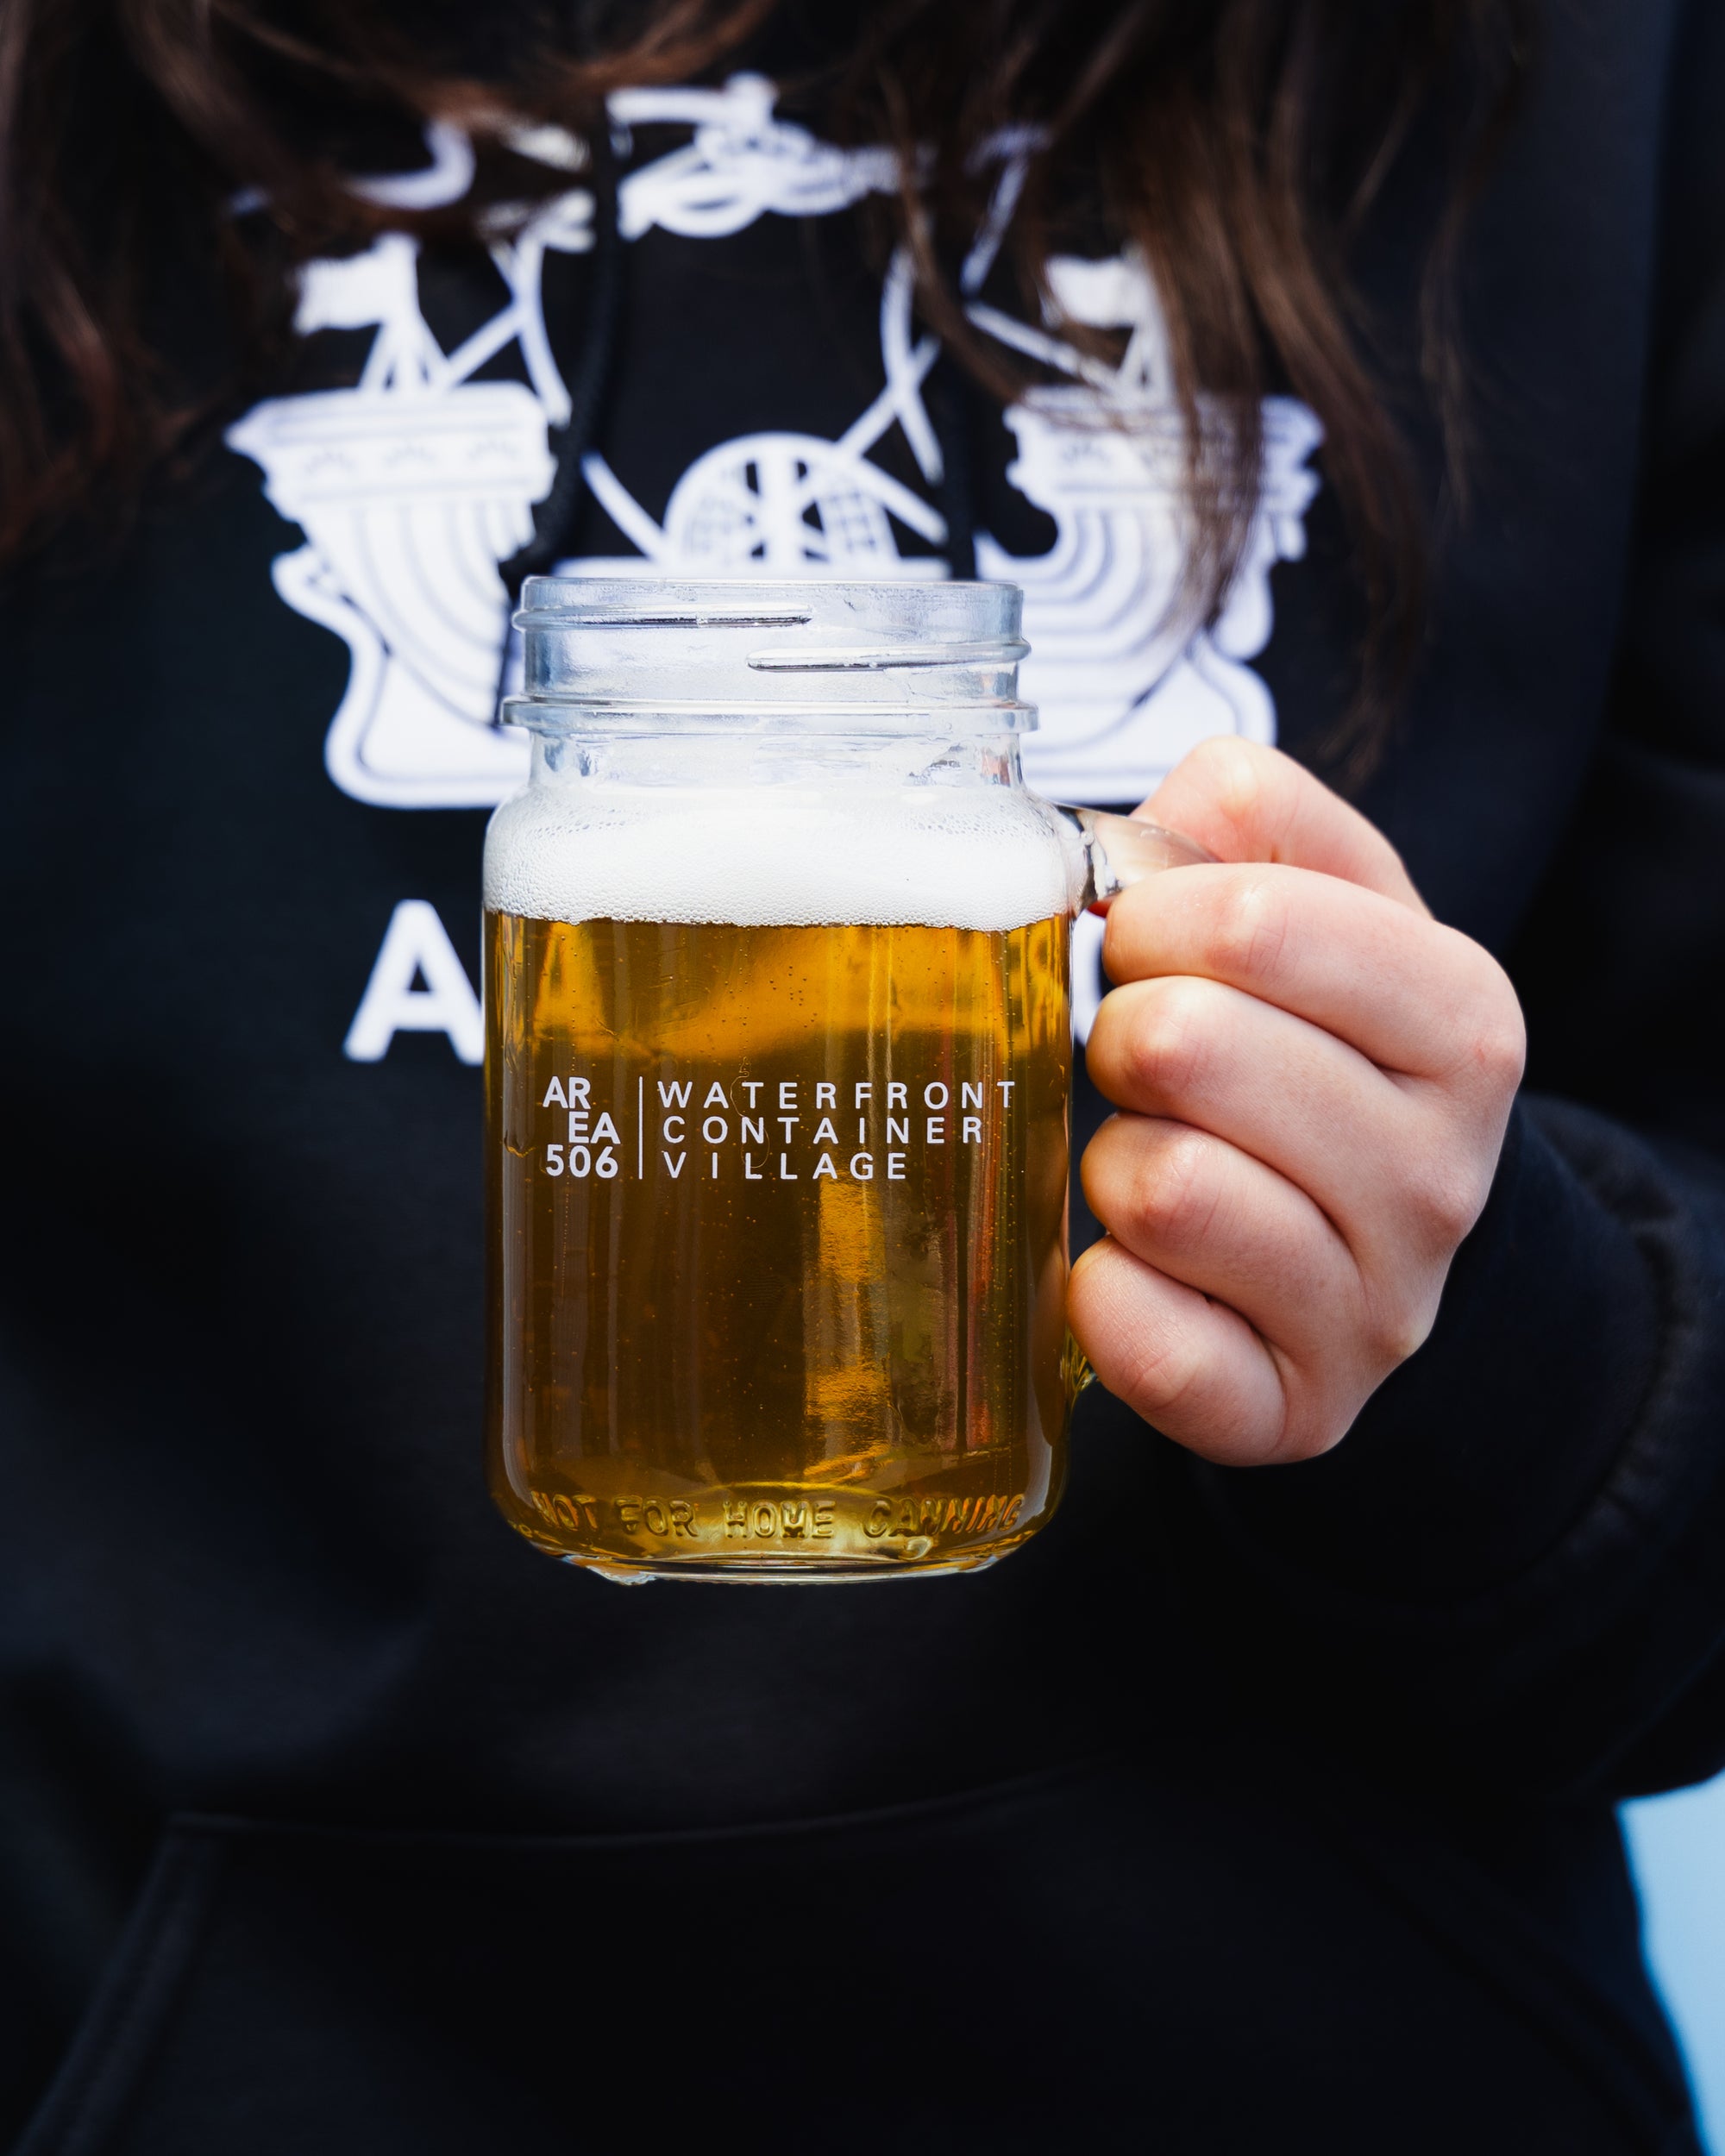 Mason jar mug with a handle for drinking, and the AREA 506 Waterfront Container Village logo.